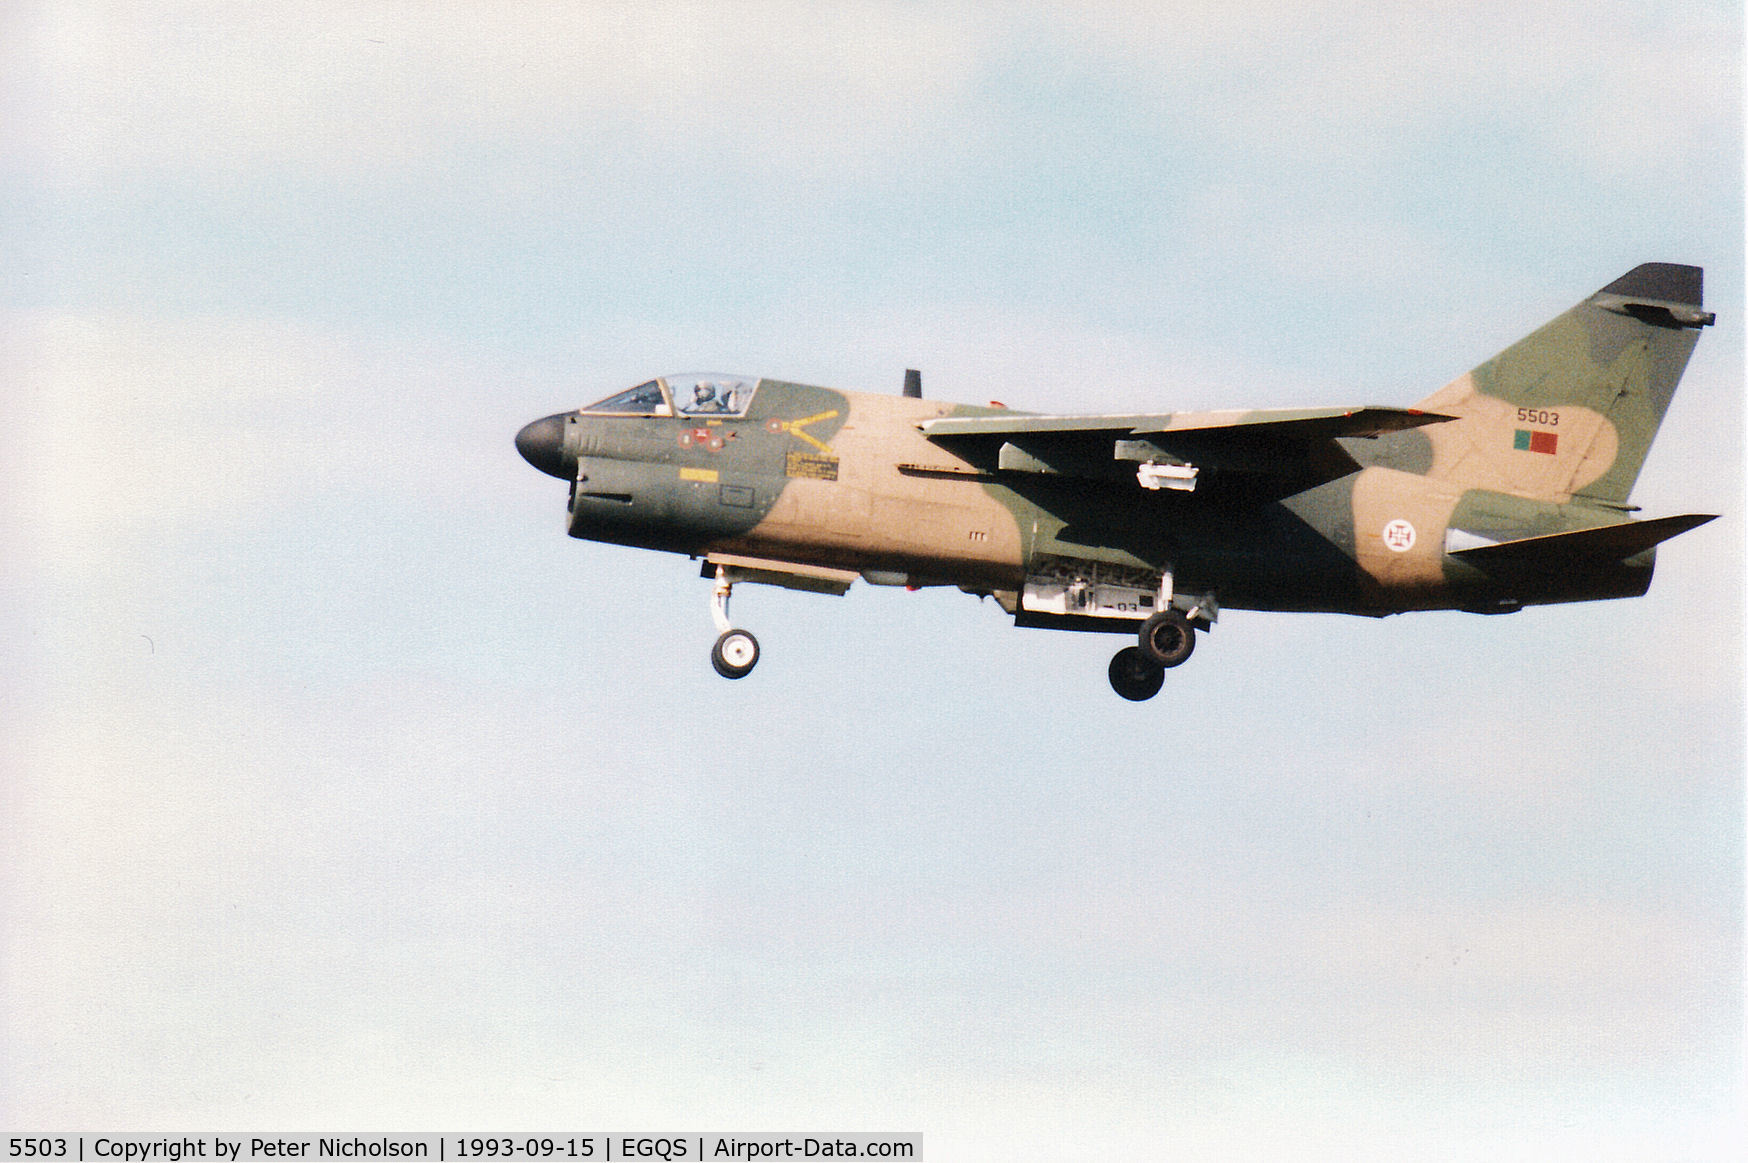 5503, LTV A-7P Corsair II C/N A-182/P-003, A-7P Corsair II of 304 Esquadron Portuguese Air Force on final approach to Runway 23 at RAF Lossiemouth in September 1993.